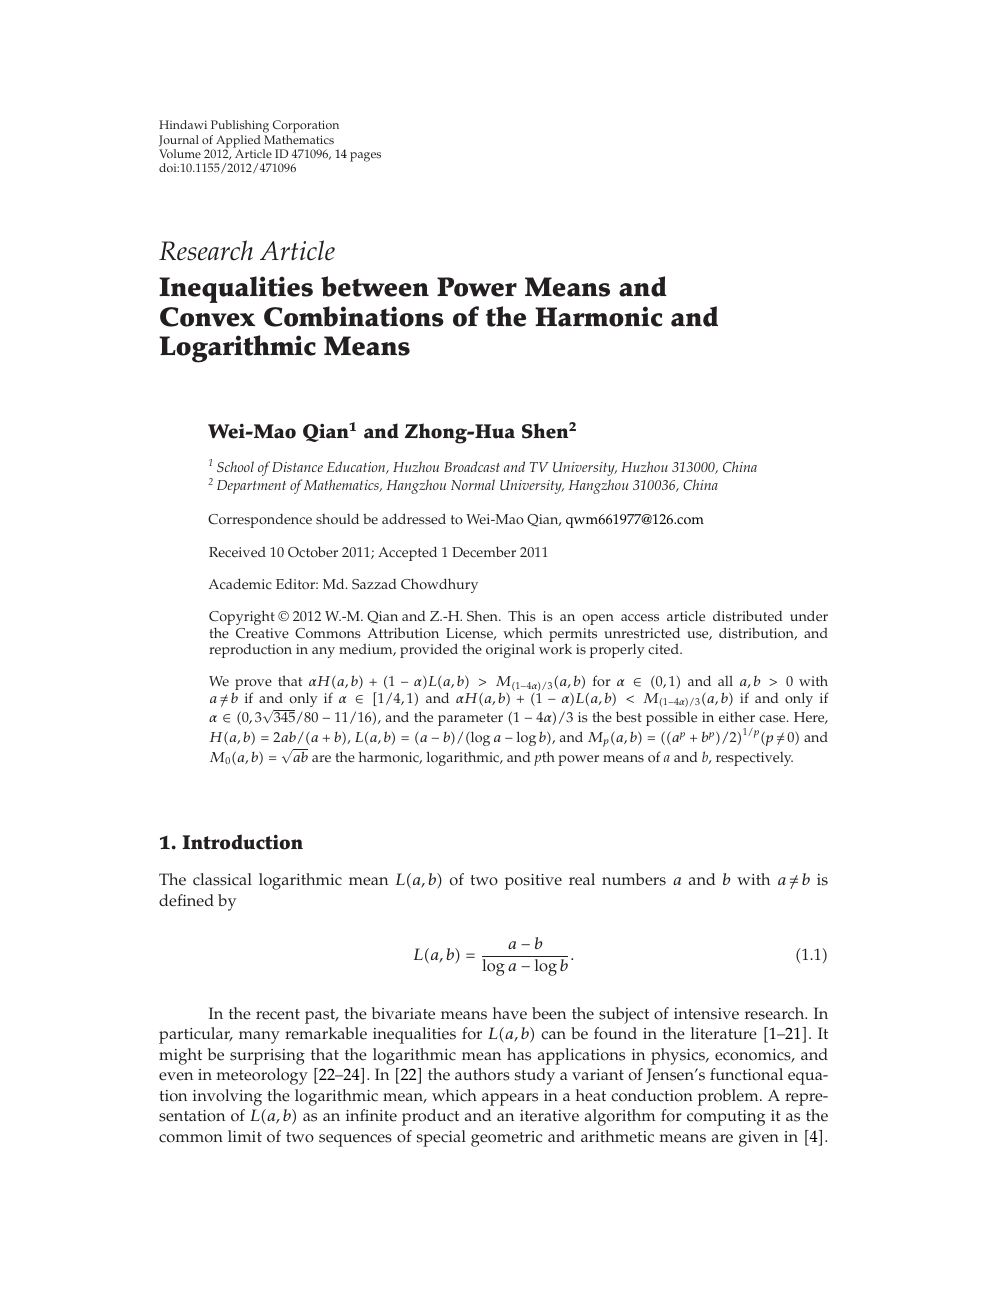 Inequalities Between Power Means And Convex Combinations Of The Harmonic And Logarithmic Means Topic Of Research Paper In Mathematics Download Scholarly Article Pdf And Read For Free On Cyberleninka Open Science